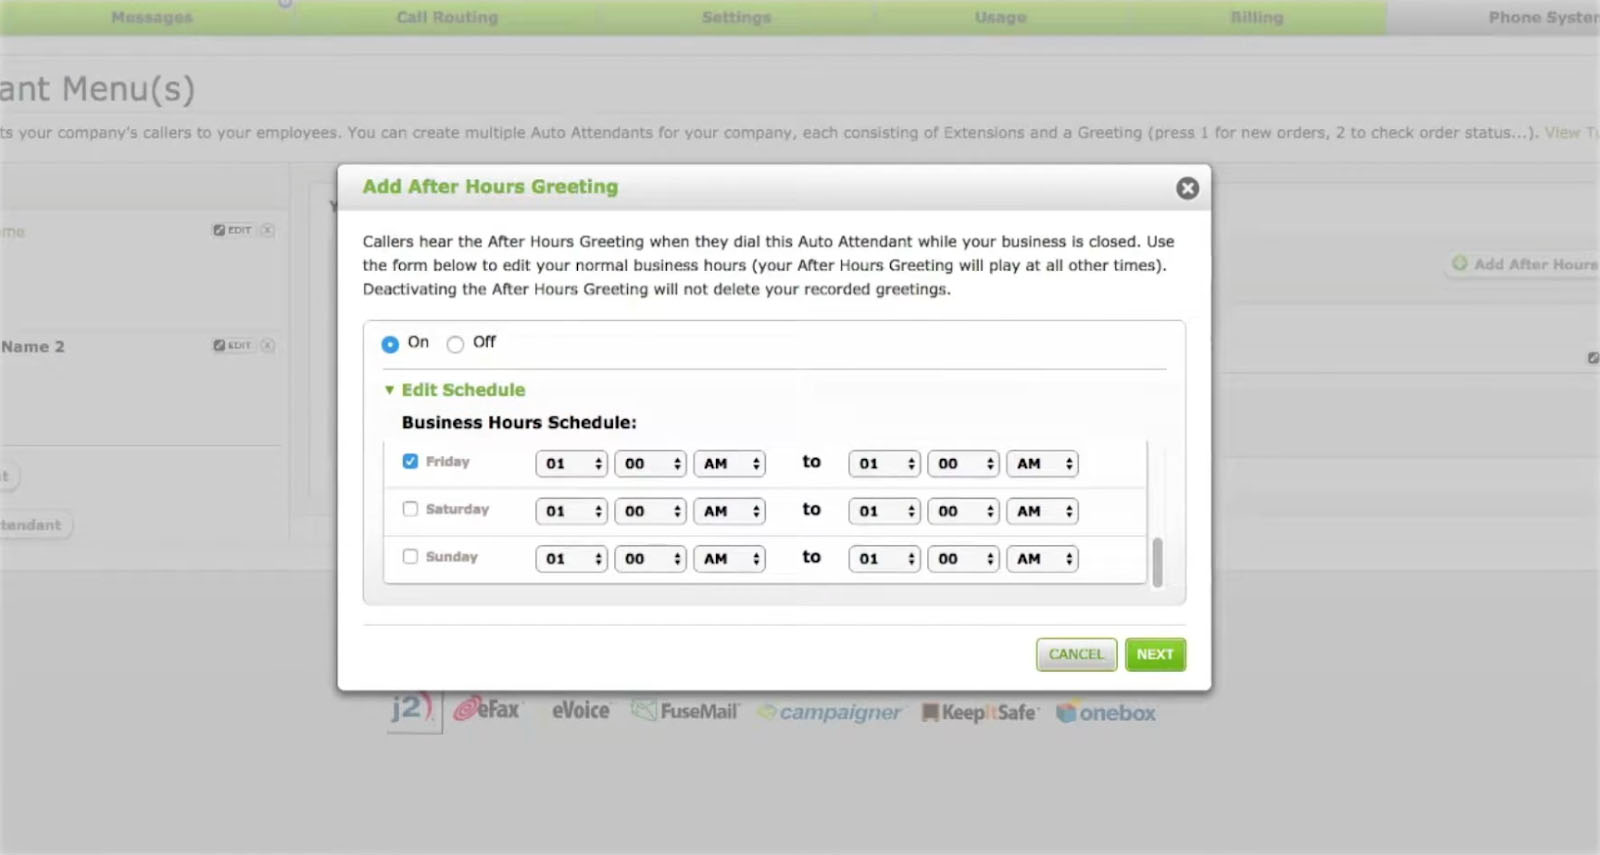 eVoice dialog box showing the after-hours greeting settings.